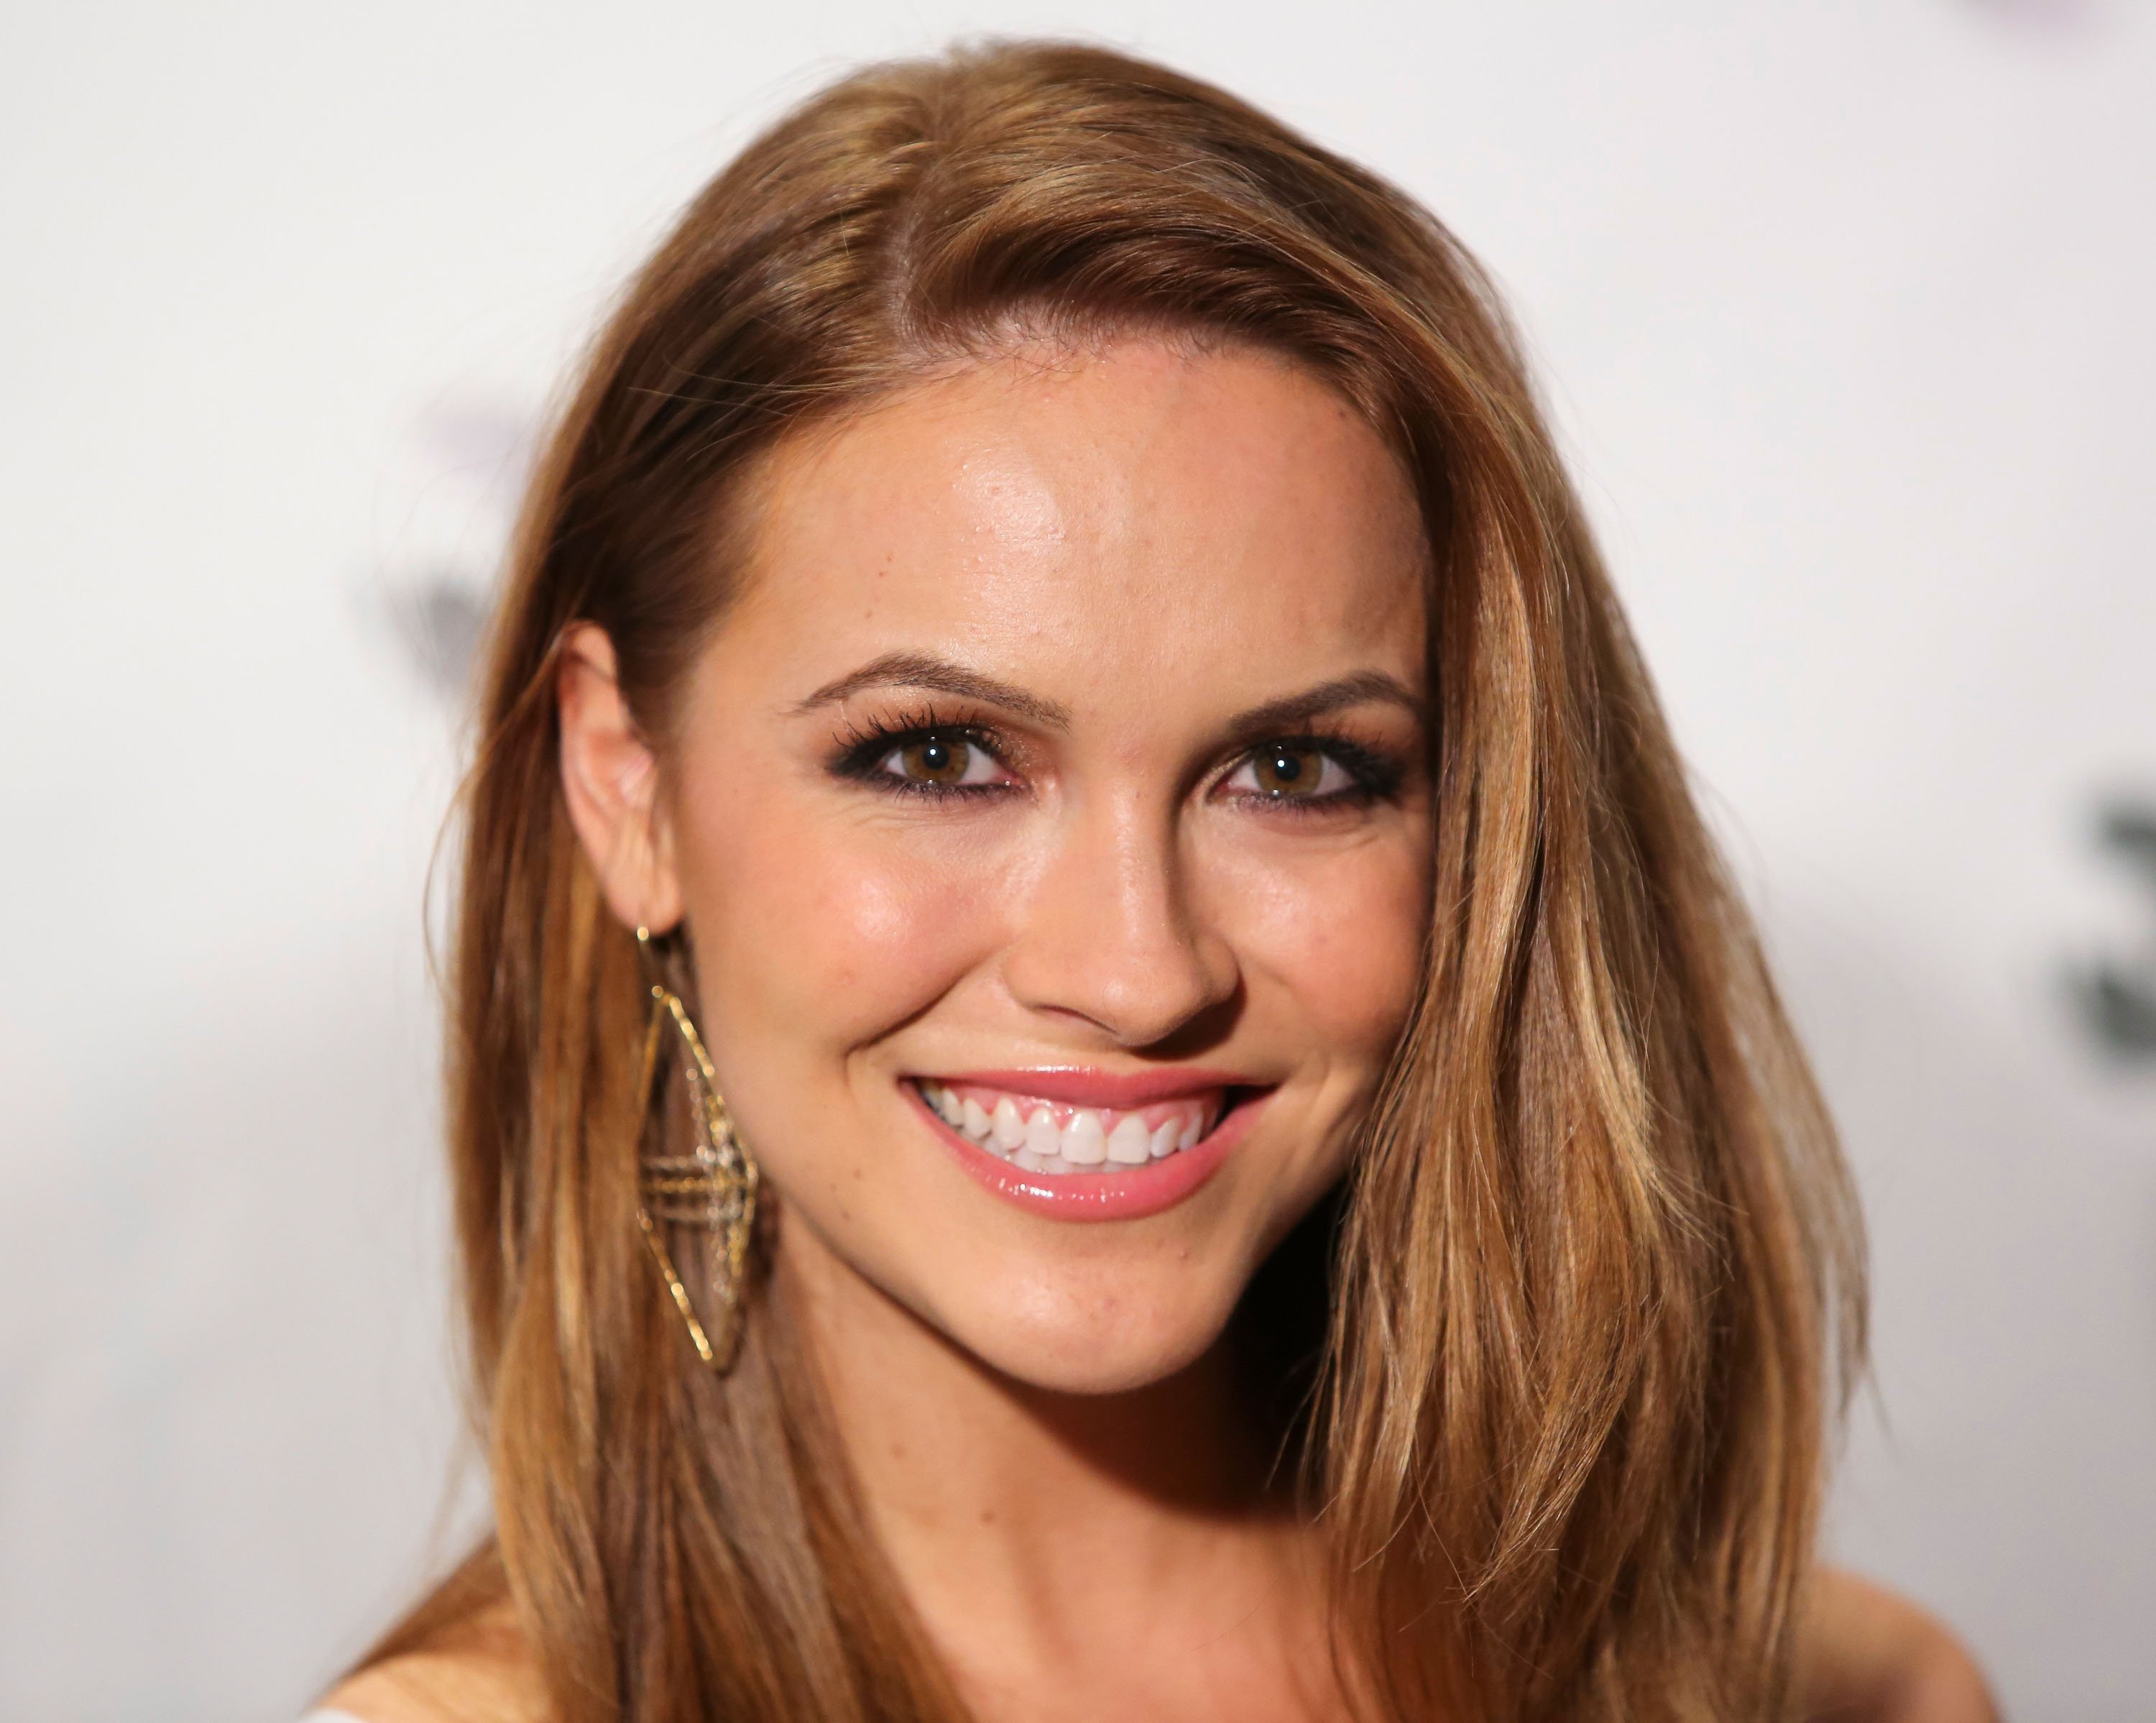 Chrishell Stause posing for a picture at a charity event